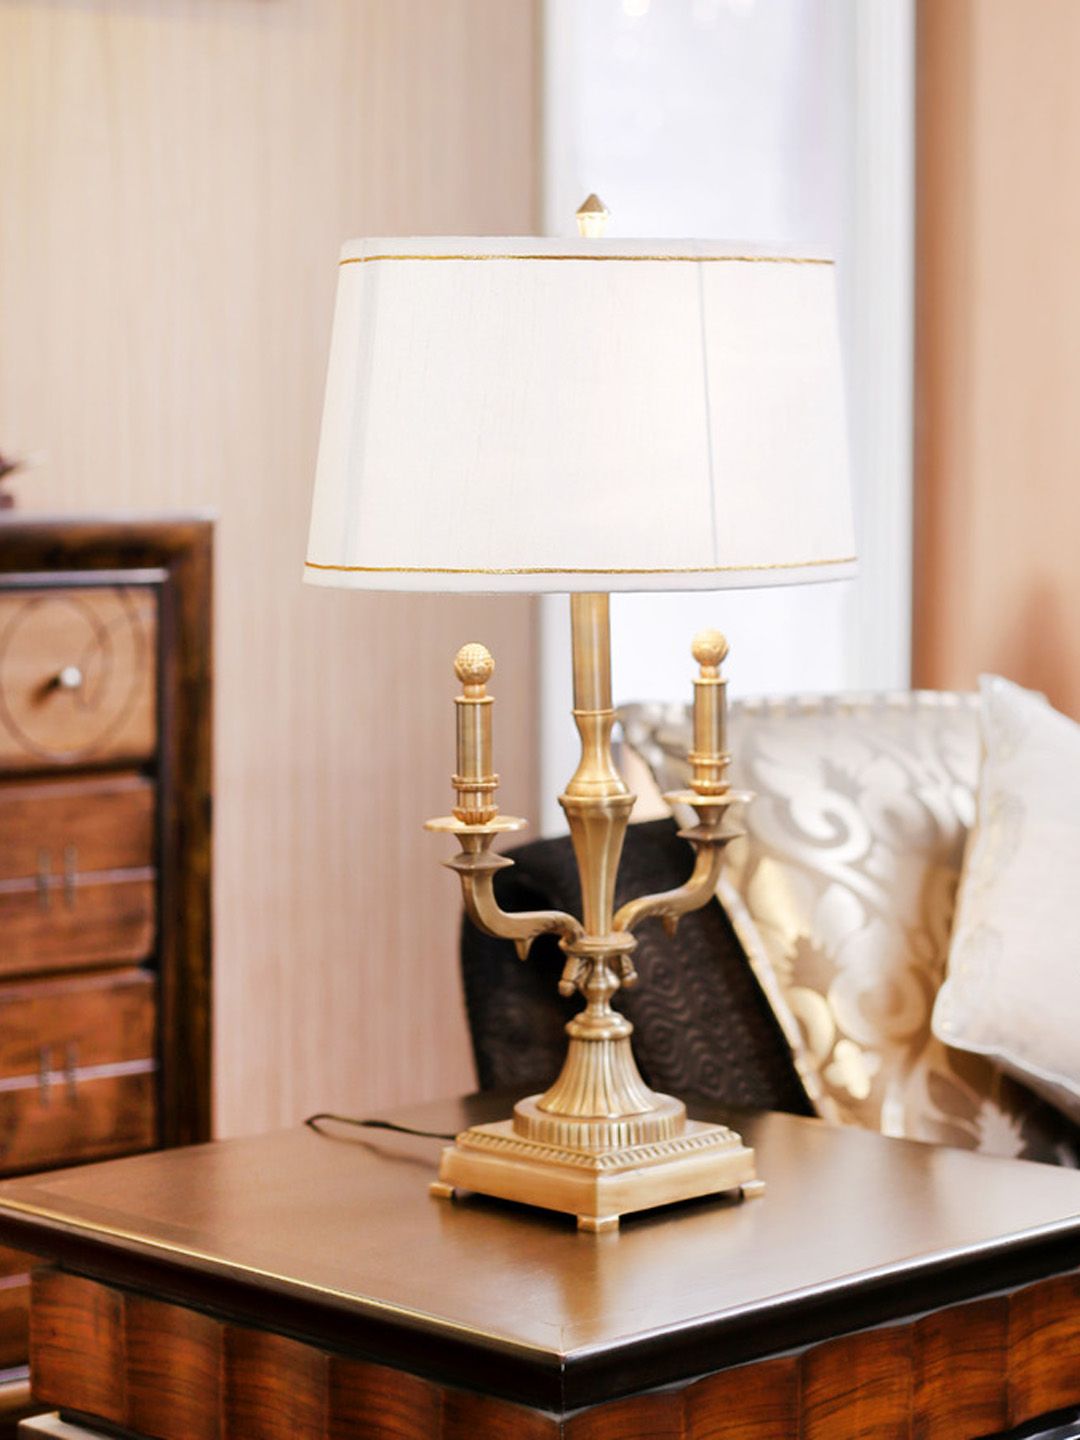 THE LIGHT STORE Antique Gold-Toned & White Bedside Standard Table Lamp with Shade Price in India